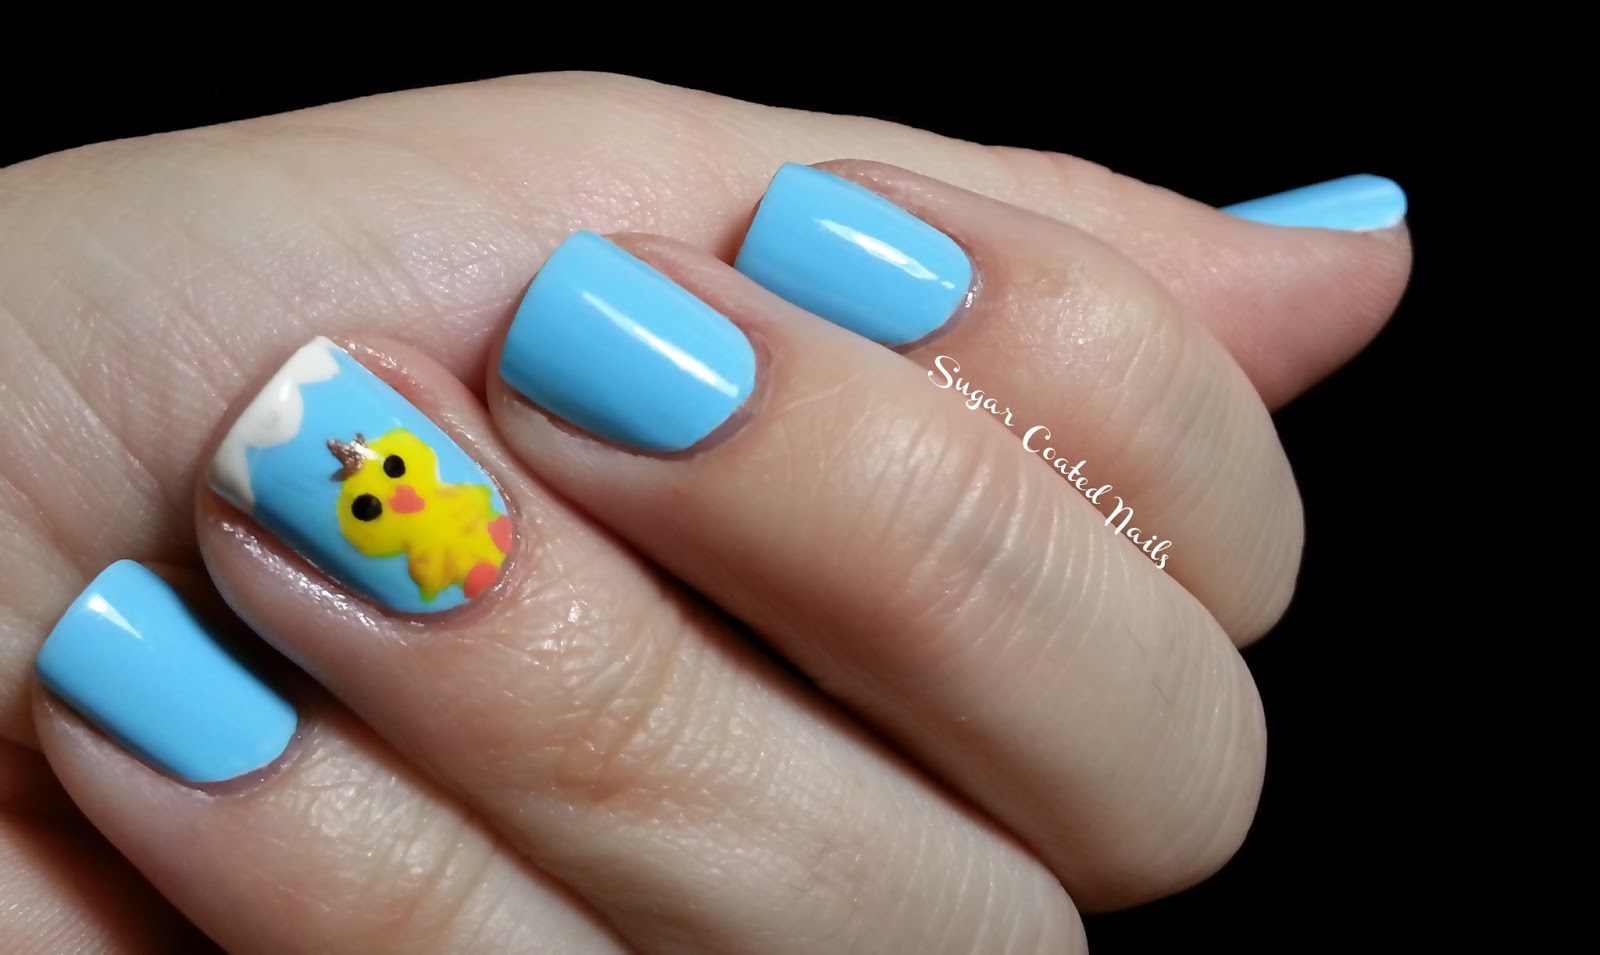 5. Easter Chick Nails - wide 3